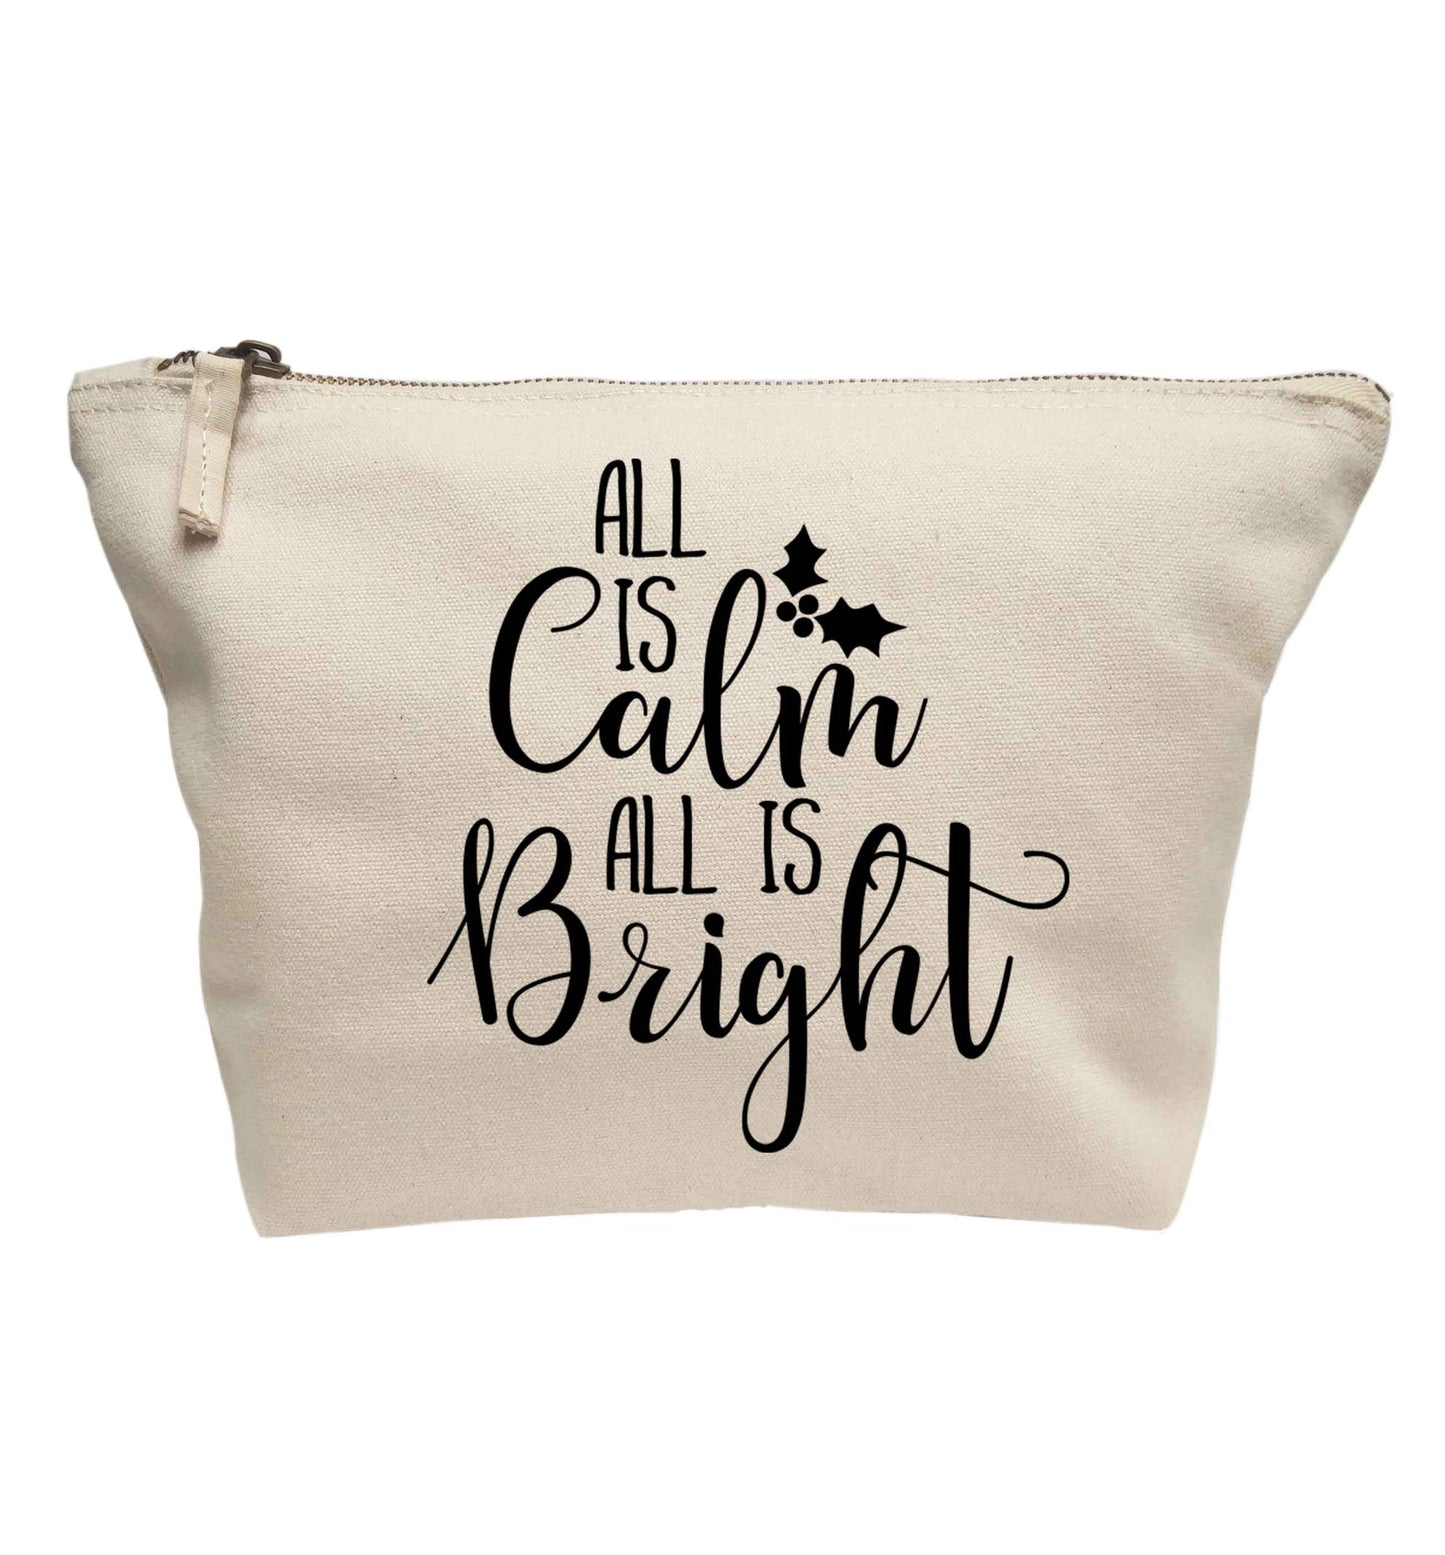 All is calm is bright | makeup / wash bag